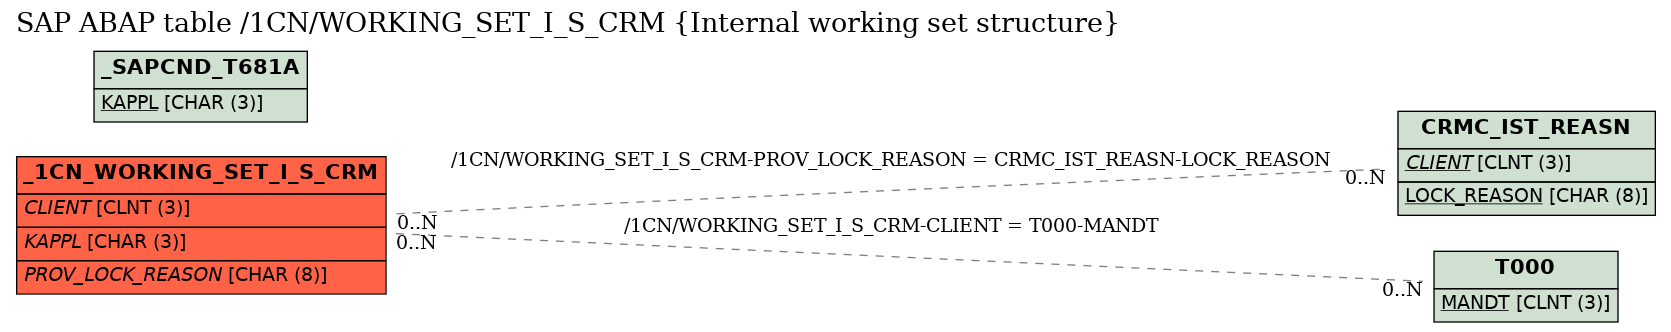 E-R Diagram for table /1CN/WORKING_SET_I_S_CRM (Internal working set structure)